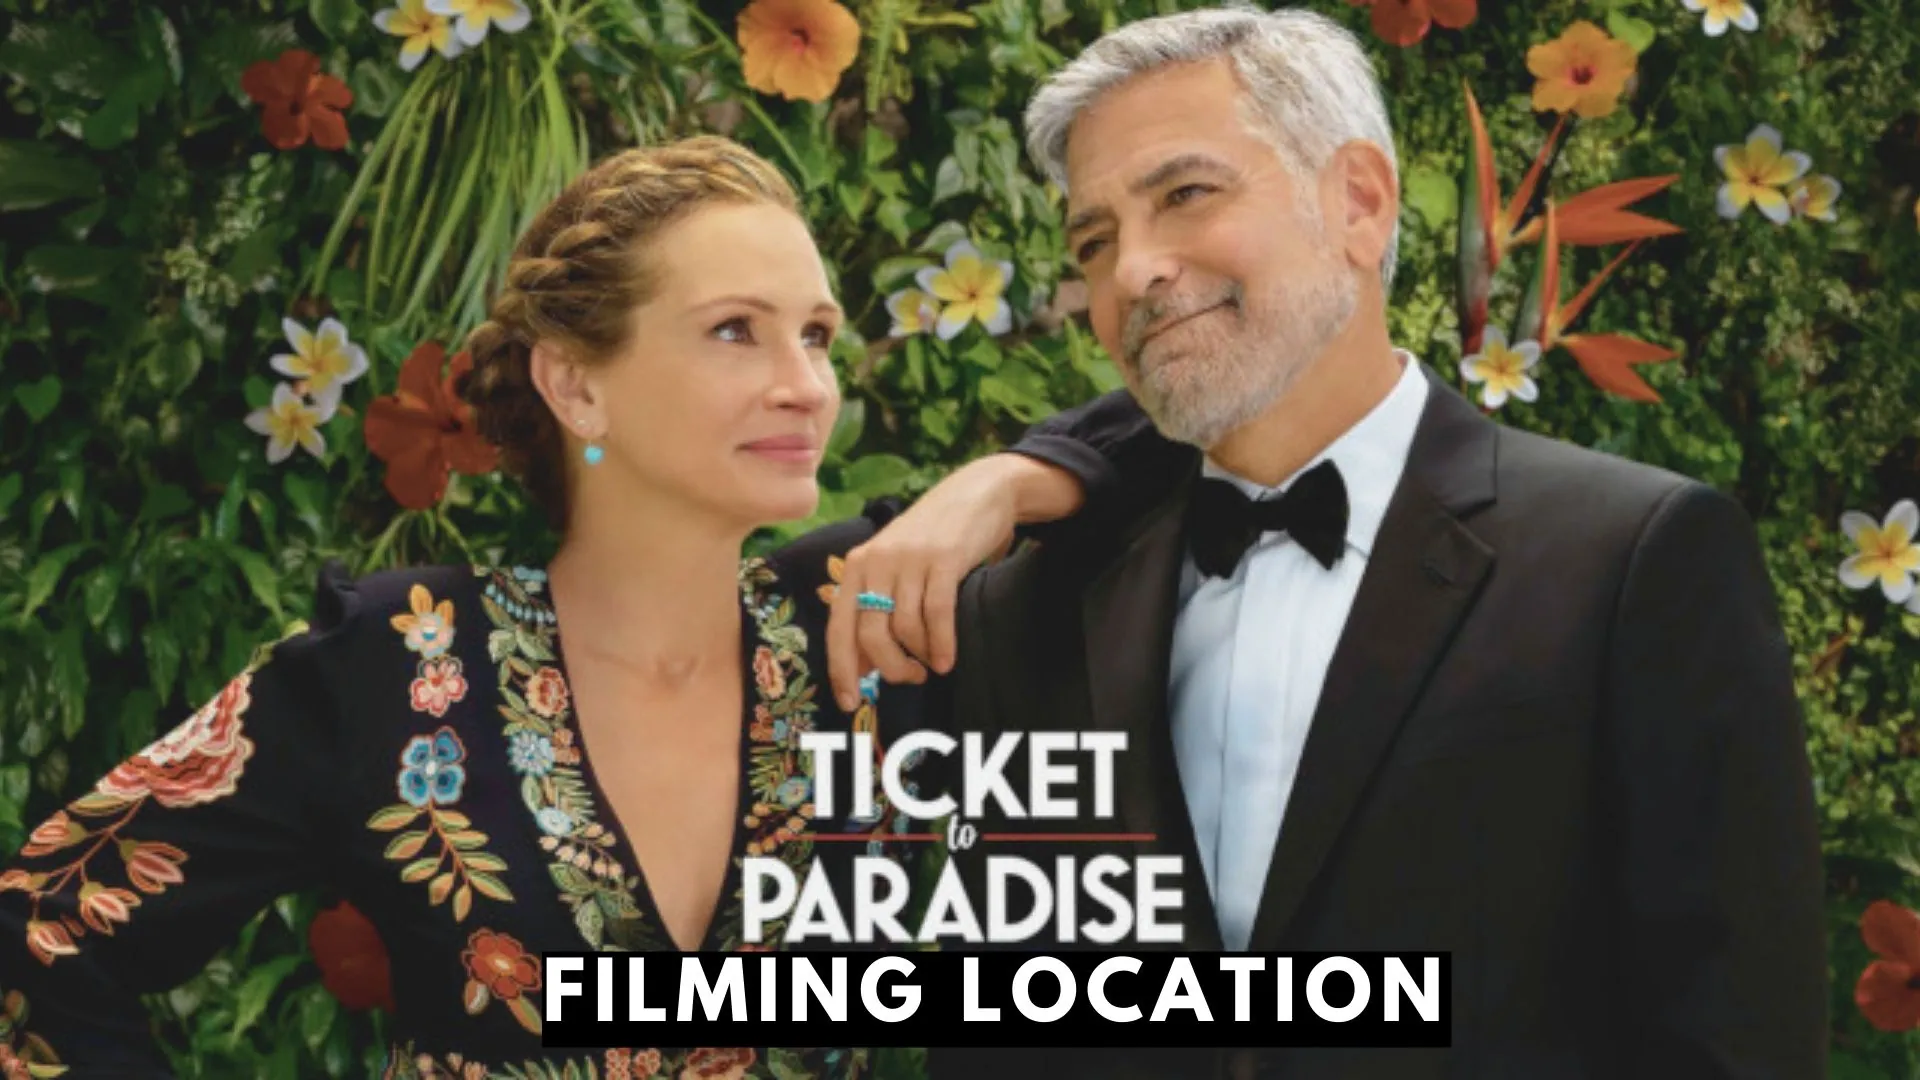 Tickets to Paradise Filming Locations